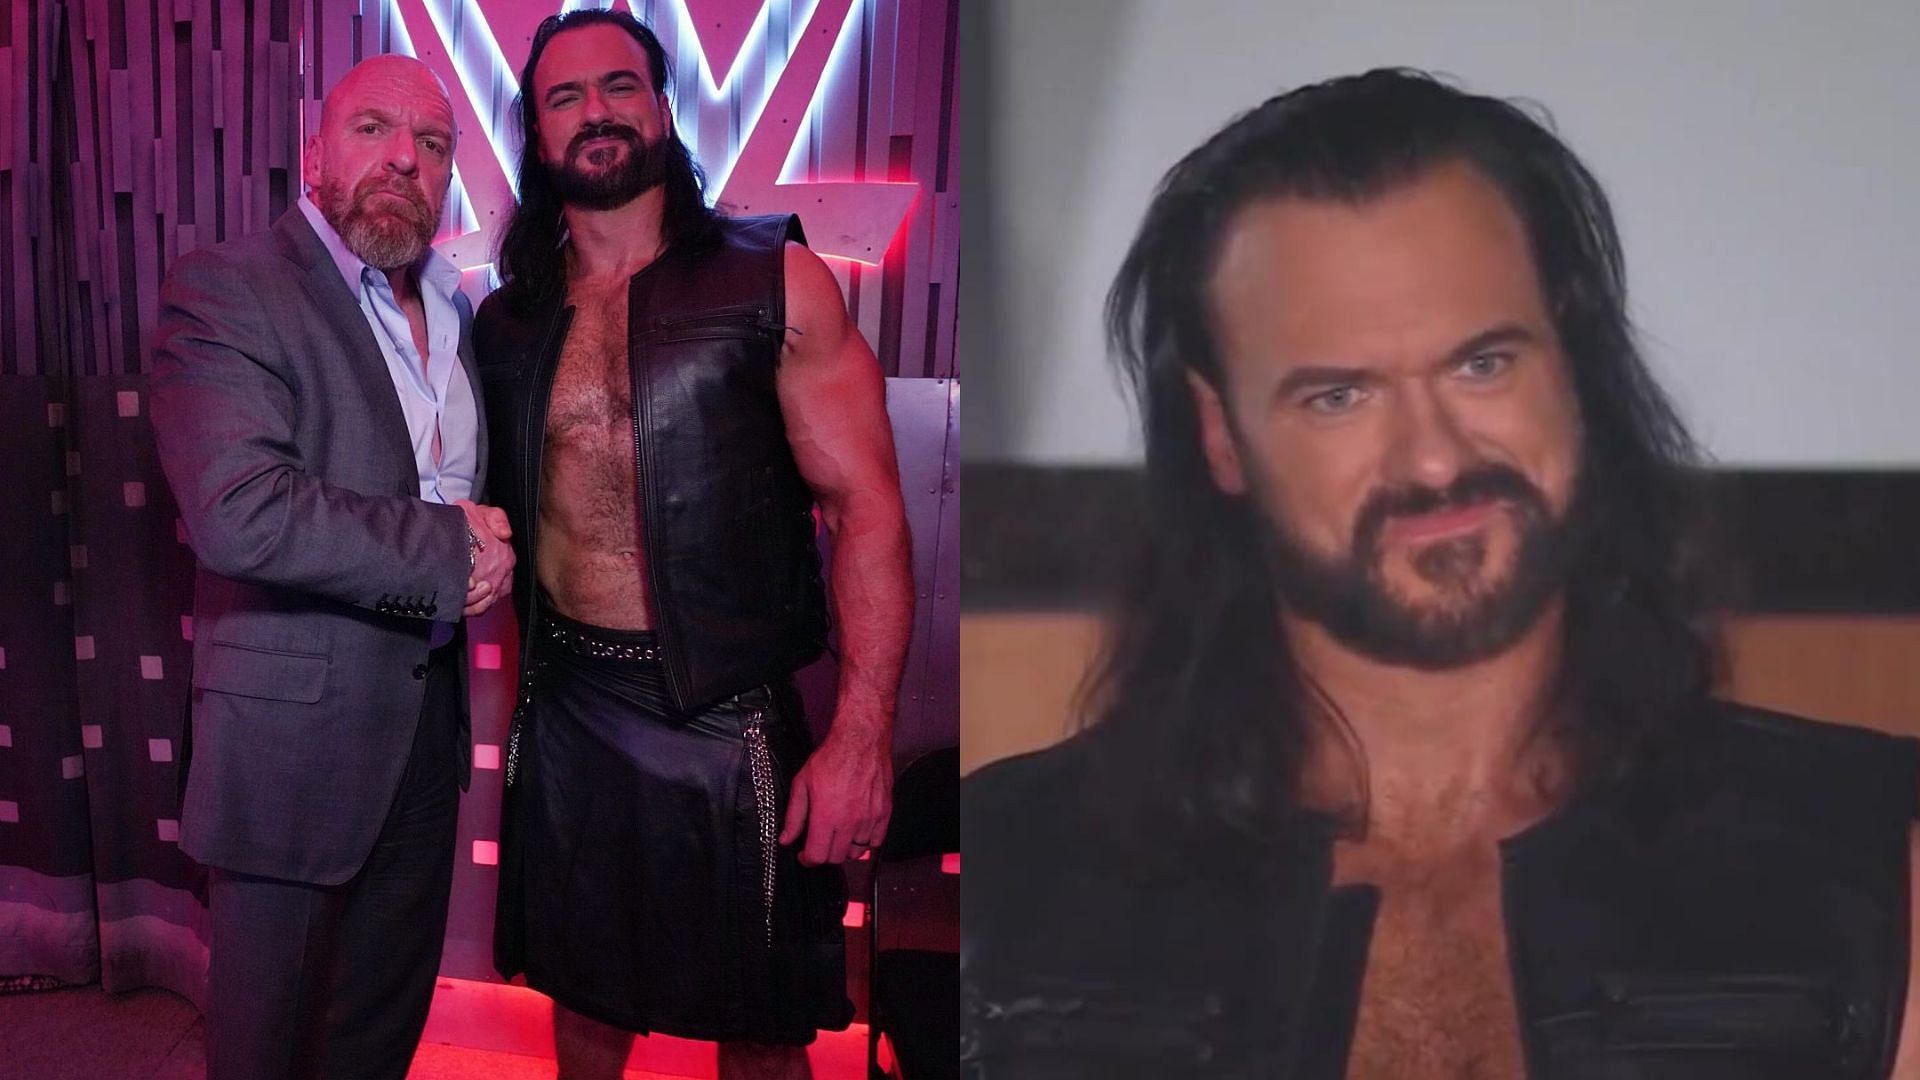 A shocking accusation just made Drew McIntyre